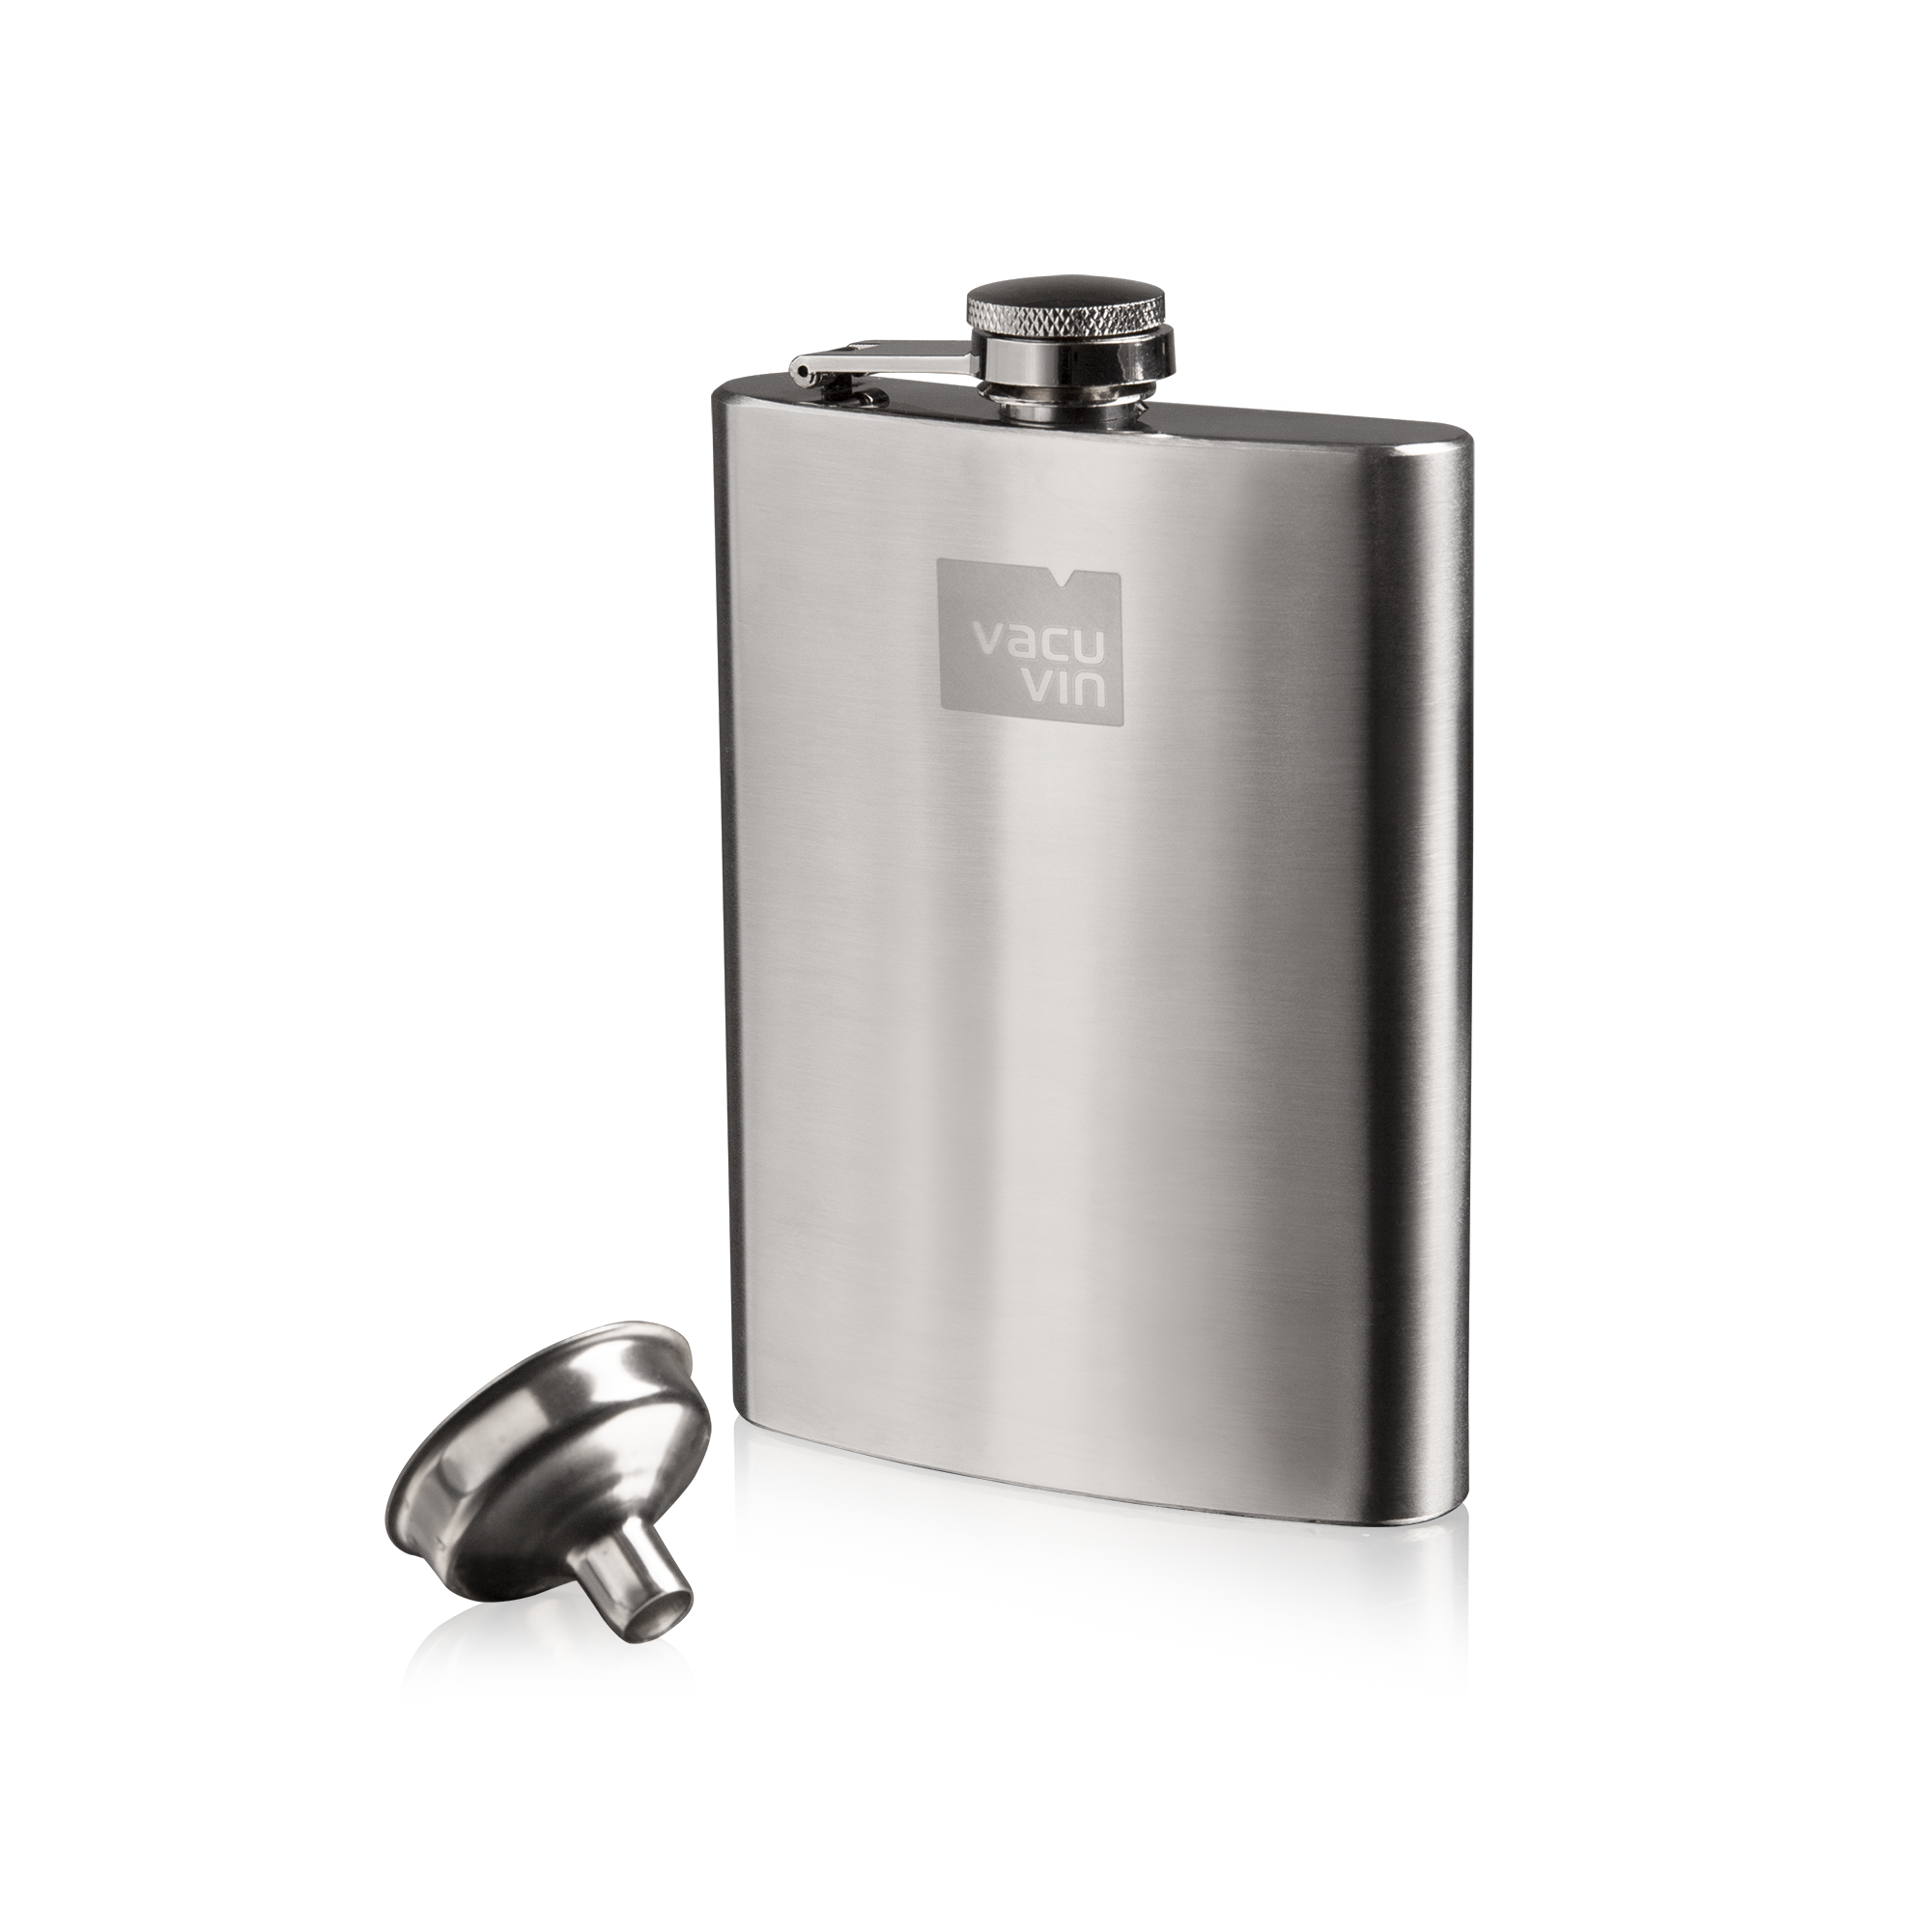 https://vacuvin.com/wp-content/uploads/2020/11/HipFlask_StainlessSteel-copy.png